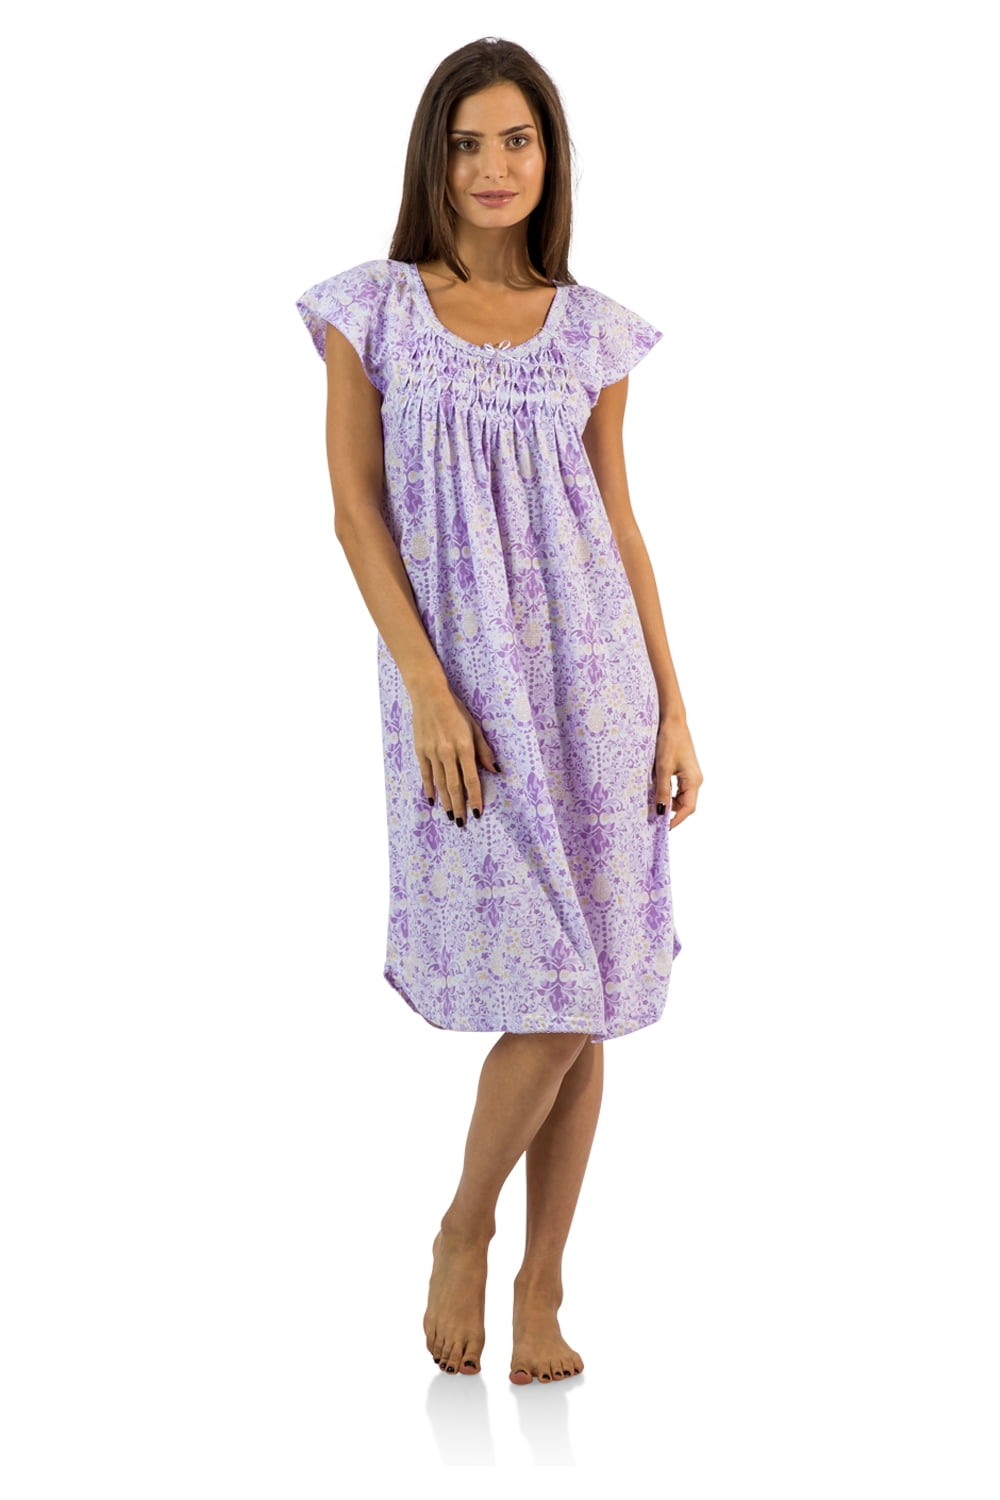 4X Casual Nights Women's Smocked Lace Short Sleeve Nightgown Purple